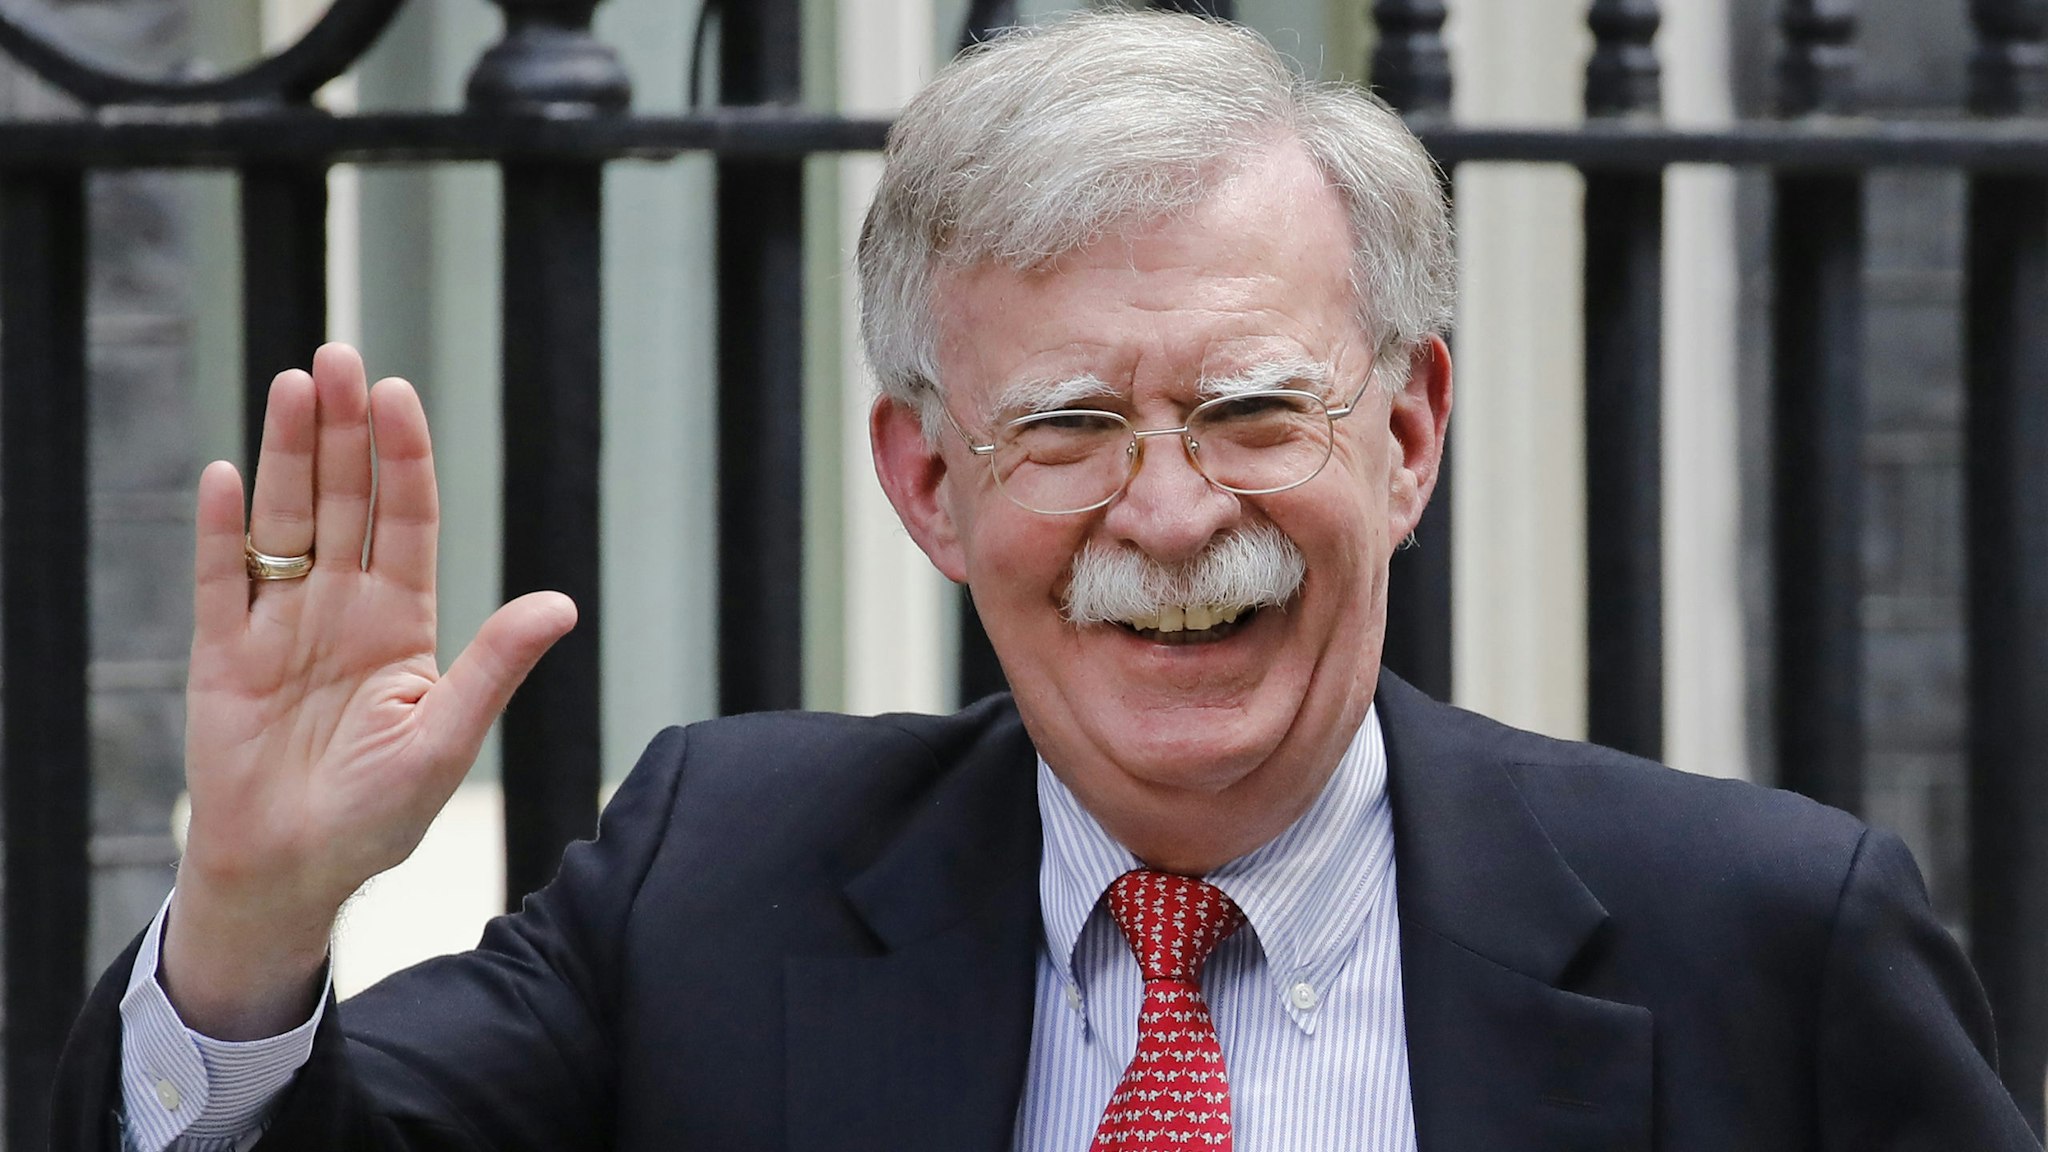 US National Security Advisor John Bolton arrives in Downing Street in London on August 13, 2019, ahead of his meeting with Britain's Chancellor of the Exchequer Sajid Javid. - US National Security Advisor John Bolton said Monday that Washington wanted "to move very quickly" on a trade deal with Britain after it leaves the EU, and that the White House would wait until after Brexit to address various security concerns.